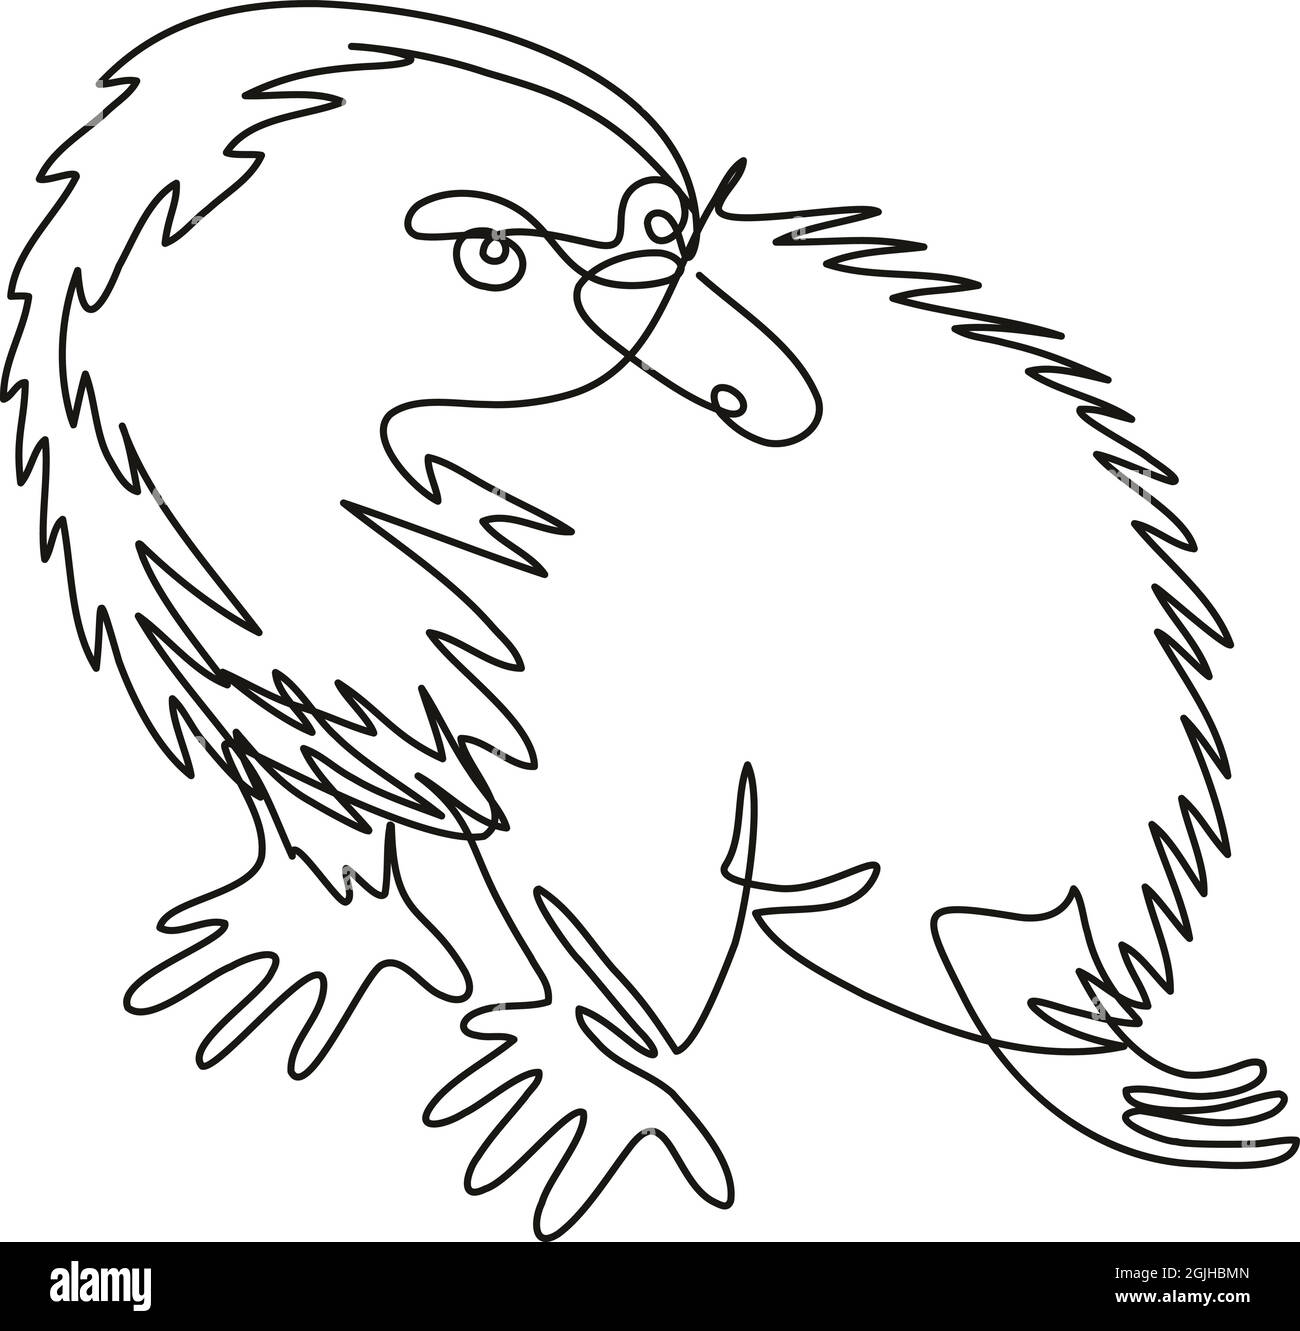 Continuous line drawing illustration of an Echidna or spiny anteater side view done in mono line or doodle style in black and white on isolated backgr Stock Vector